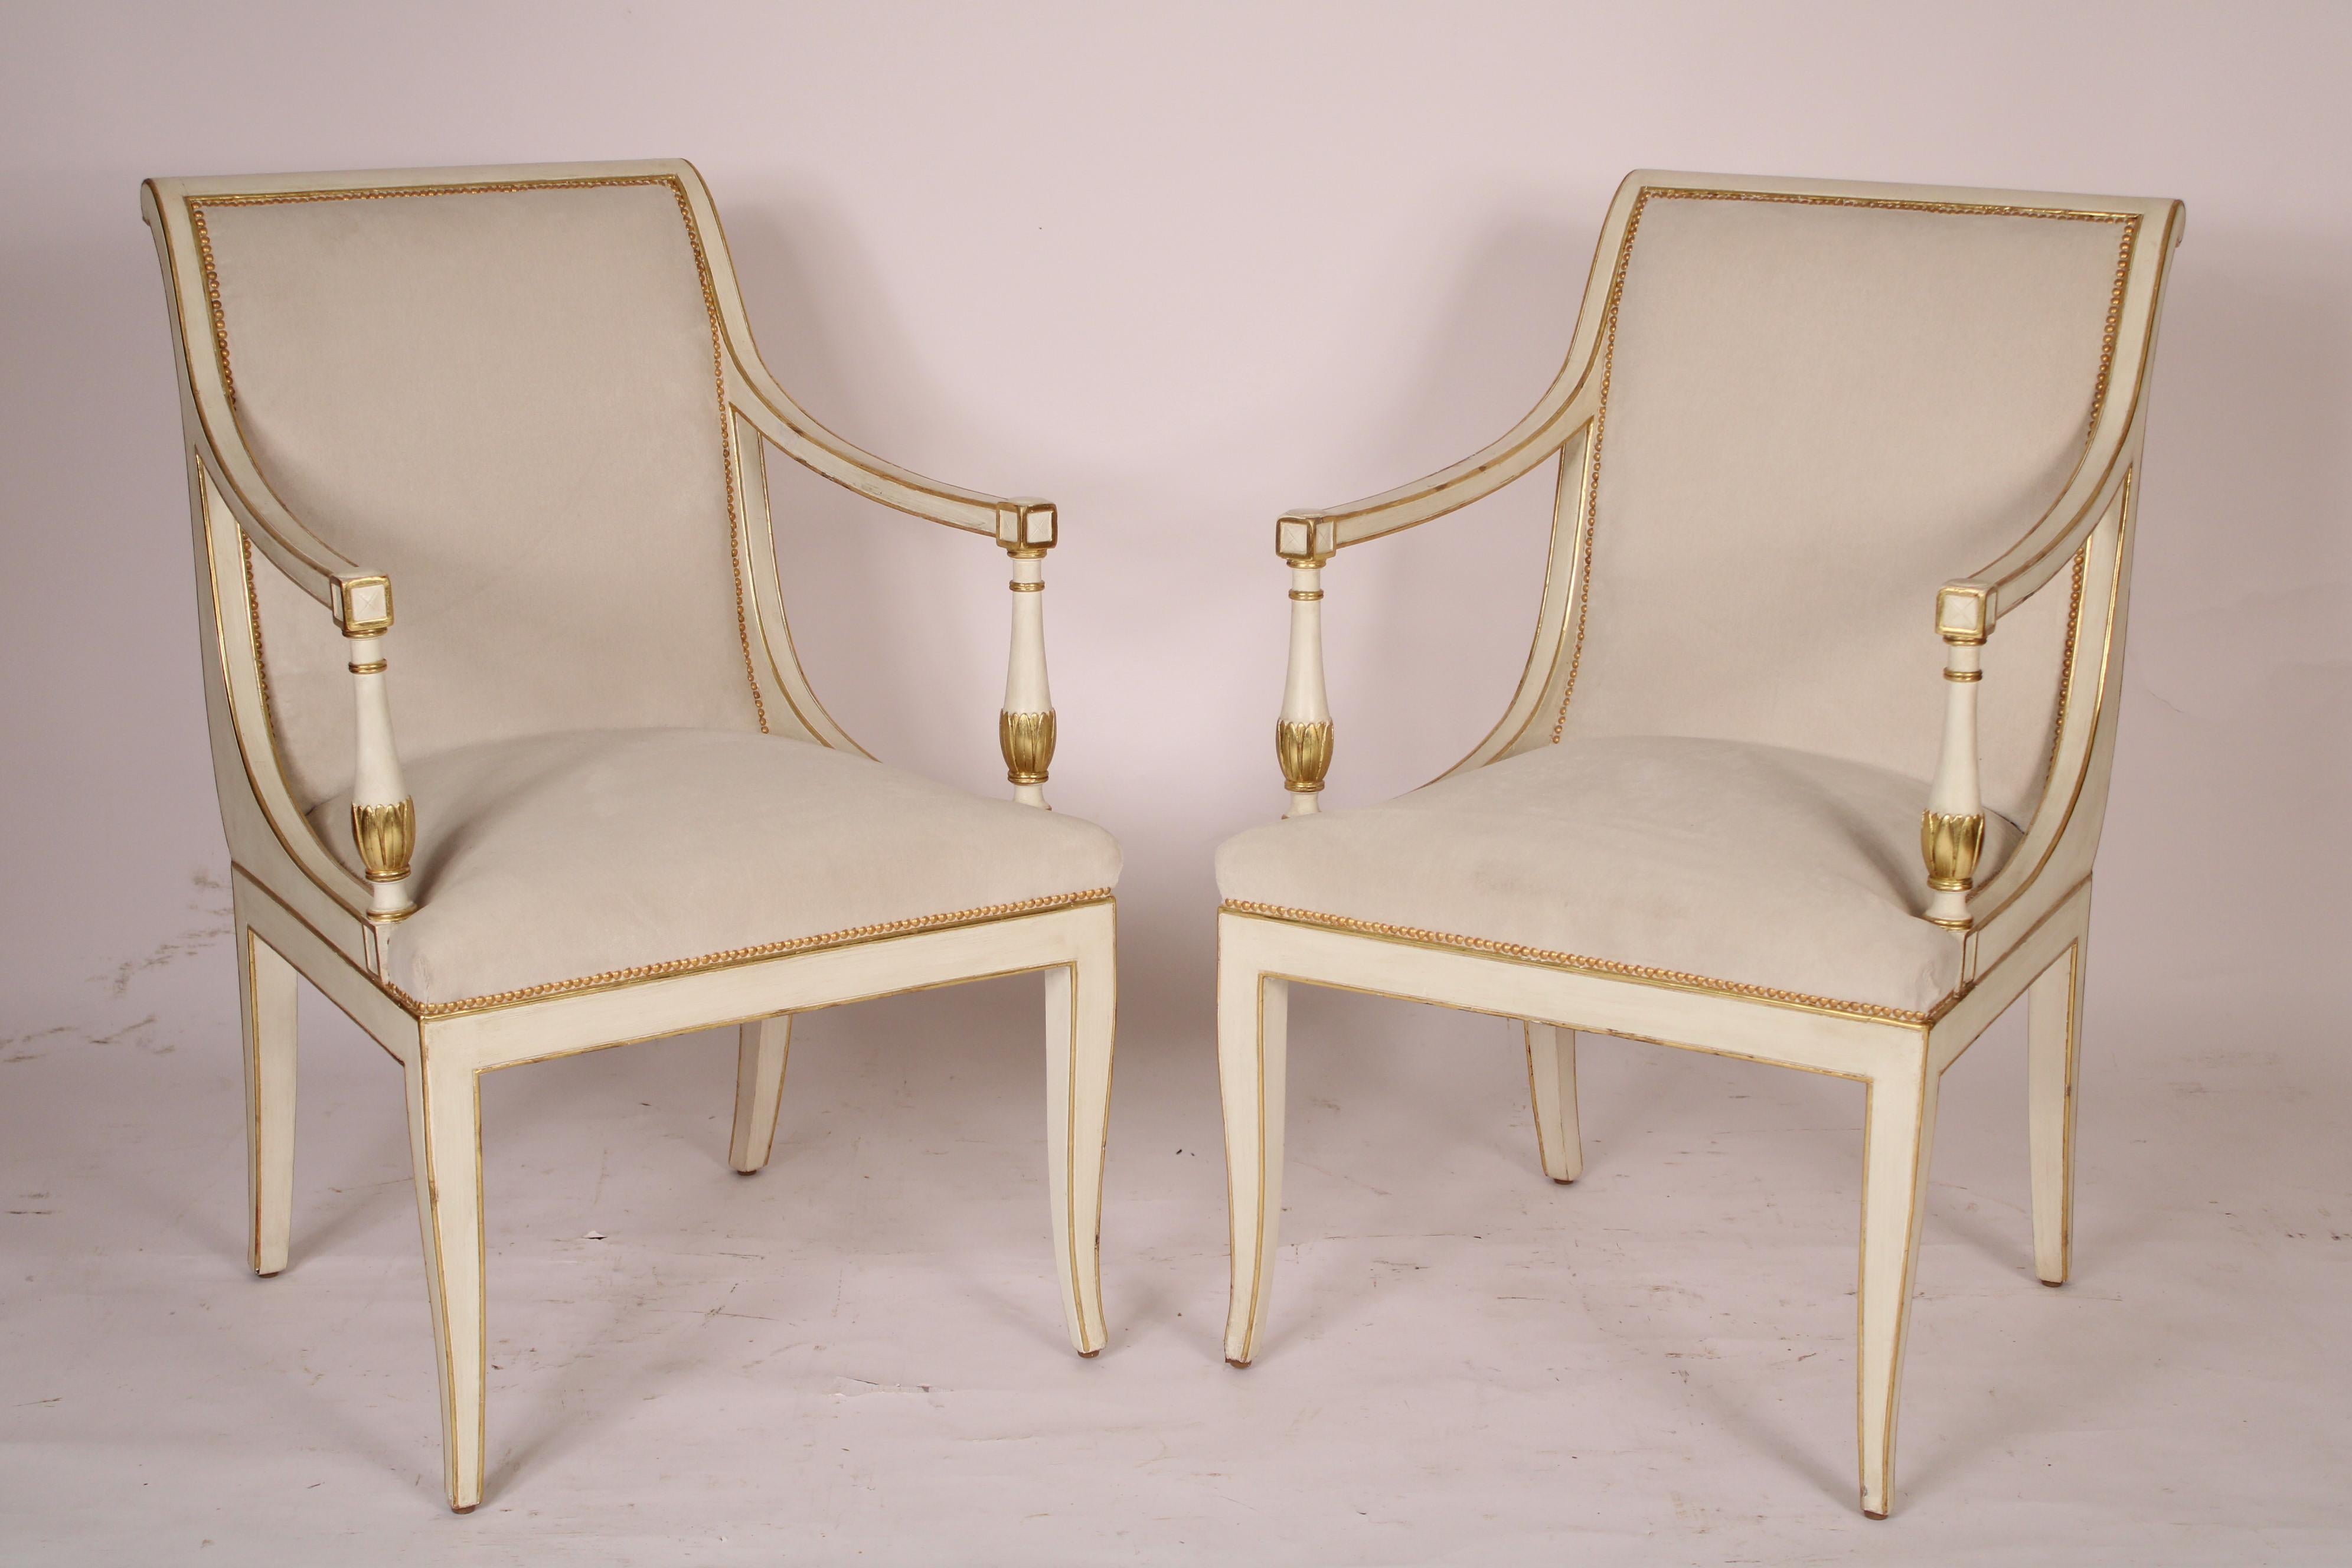 Pair of Northern European neo classical style painted and gilt decorated armchairs, circa 1970's. With scroll shaped crest rail, serpentine shaped back  as seen from sides upholstered with gold nail head trim,  down swept arms supported with